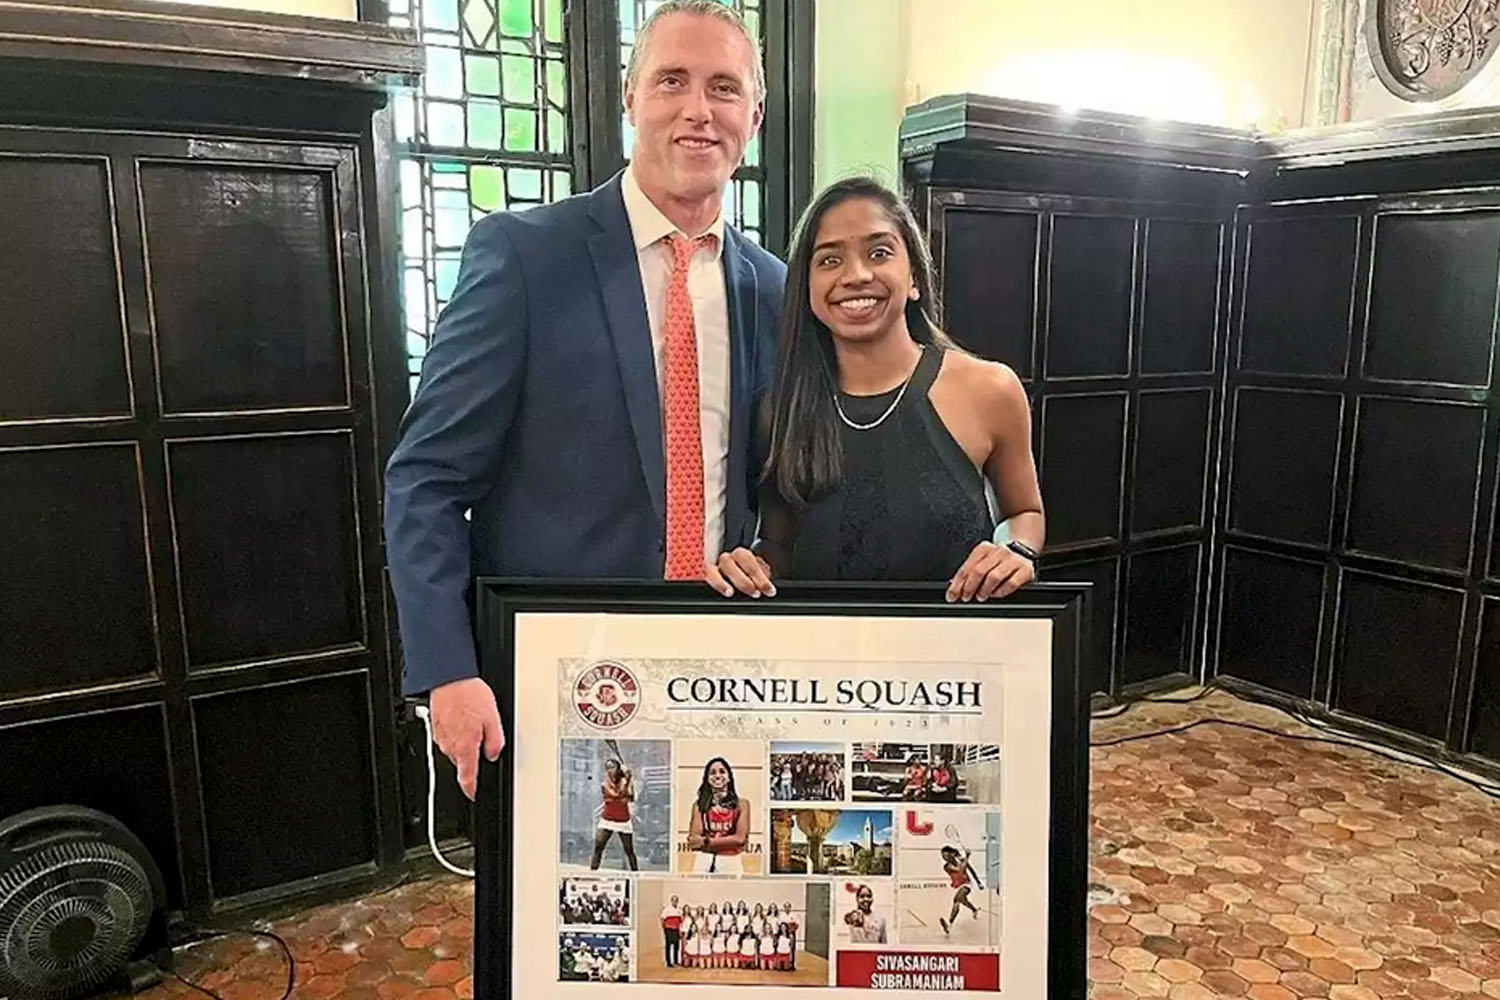 Sivasangari gets the highest recognition for contribution to collegiate squash in USA